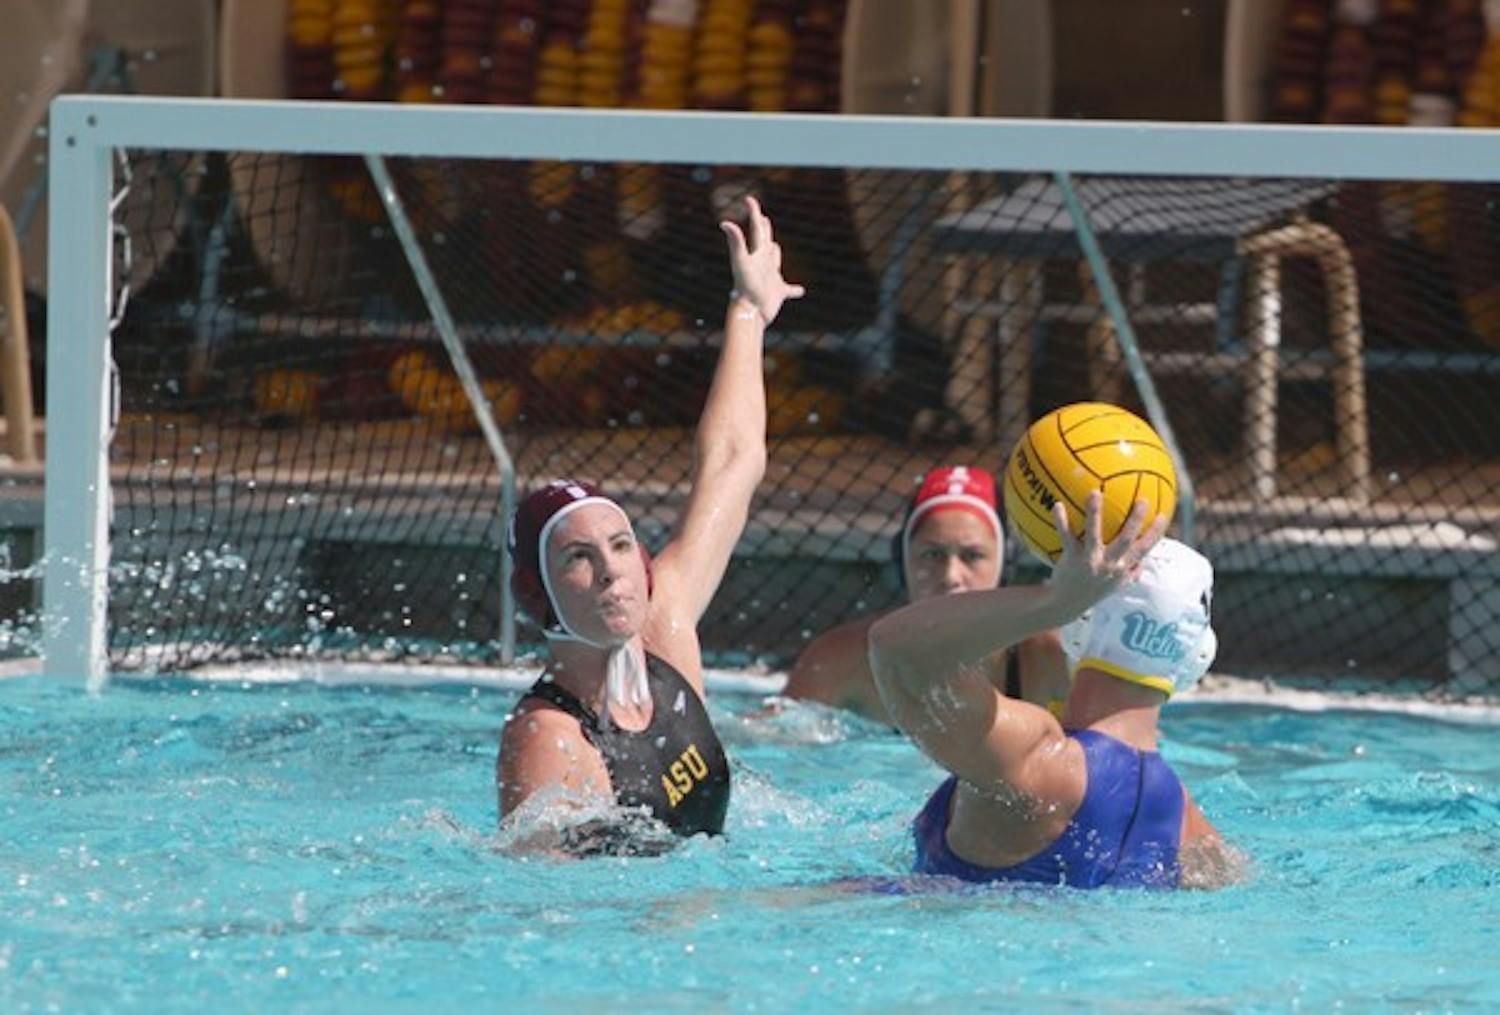 Still searching: ASU redshirt senior attacker Sarah Harris reaches to block a shot during the Sun Devils’ 8-1 loss to UCLA on March 5. After dropping Saturday’s game to Hawaii, ASU closed out the regular season without a victory in conference play. (Photo by Beth Easterbrook)